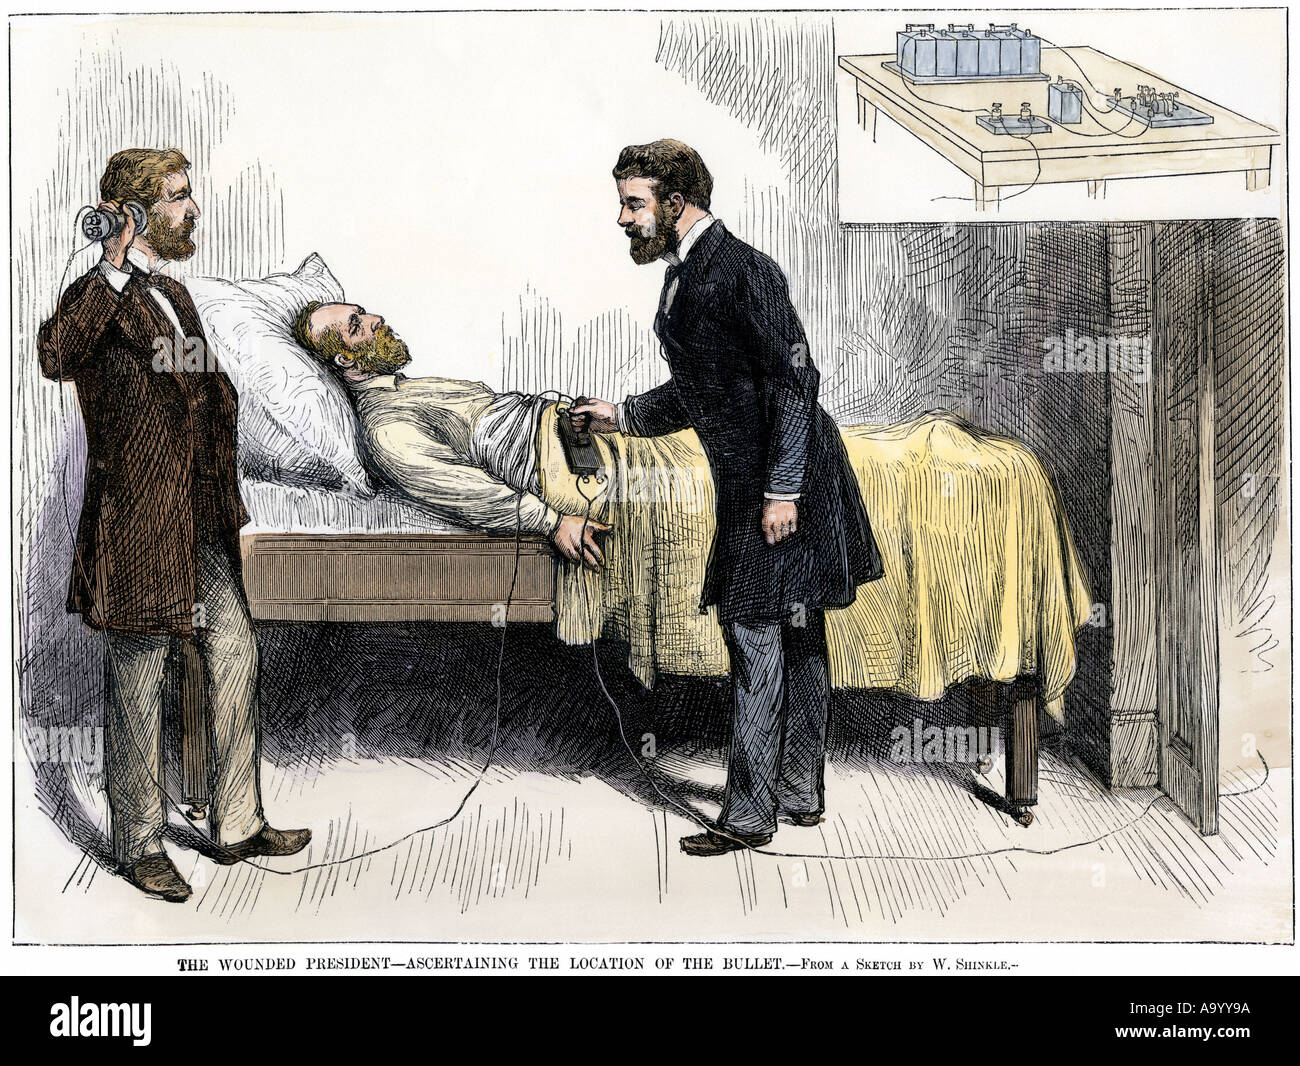 Alexander Graham Bell and Simon Newcomb using induction to locate bullet in the wounded President James Garfield 1881. Hand-colored woodcut Stock Photo